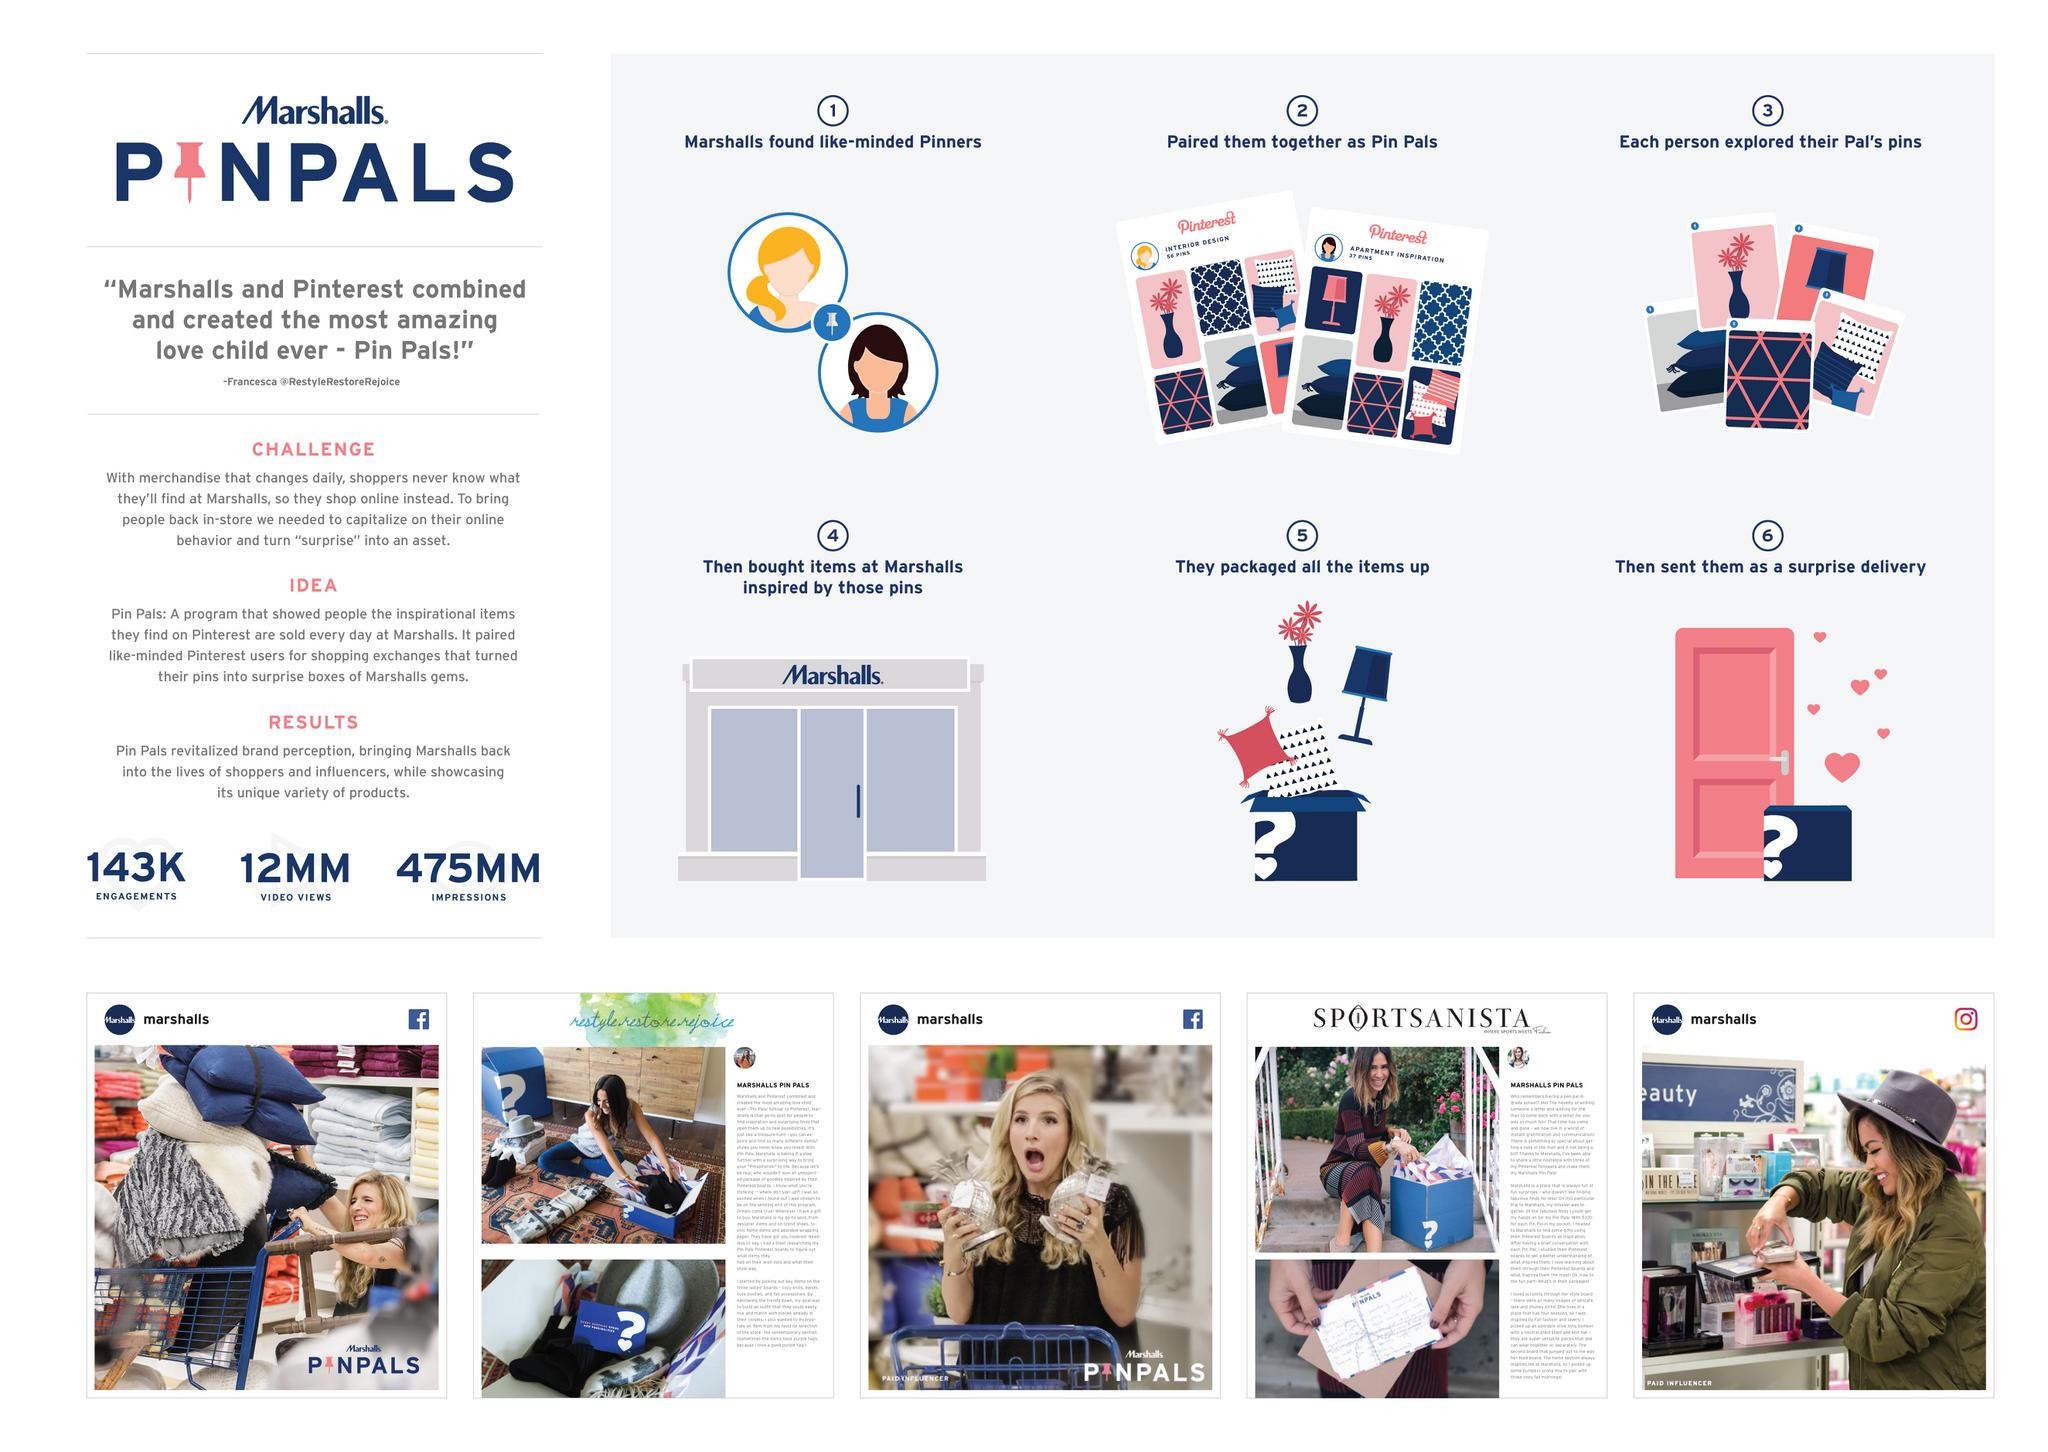 Pin Pals: Reframing How Consumers Think About the Marshalls Shopping Experience